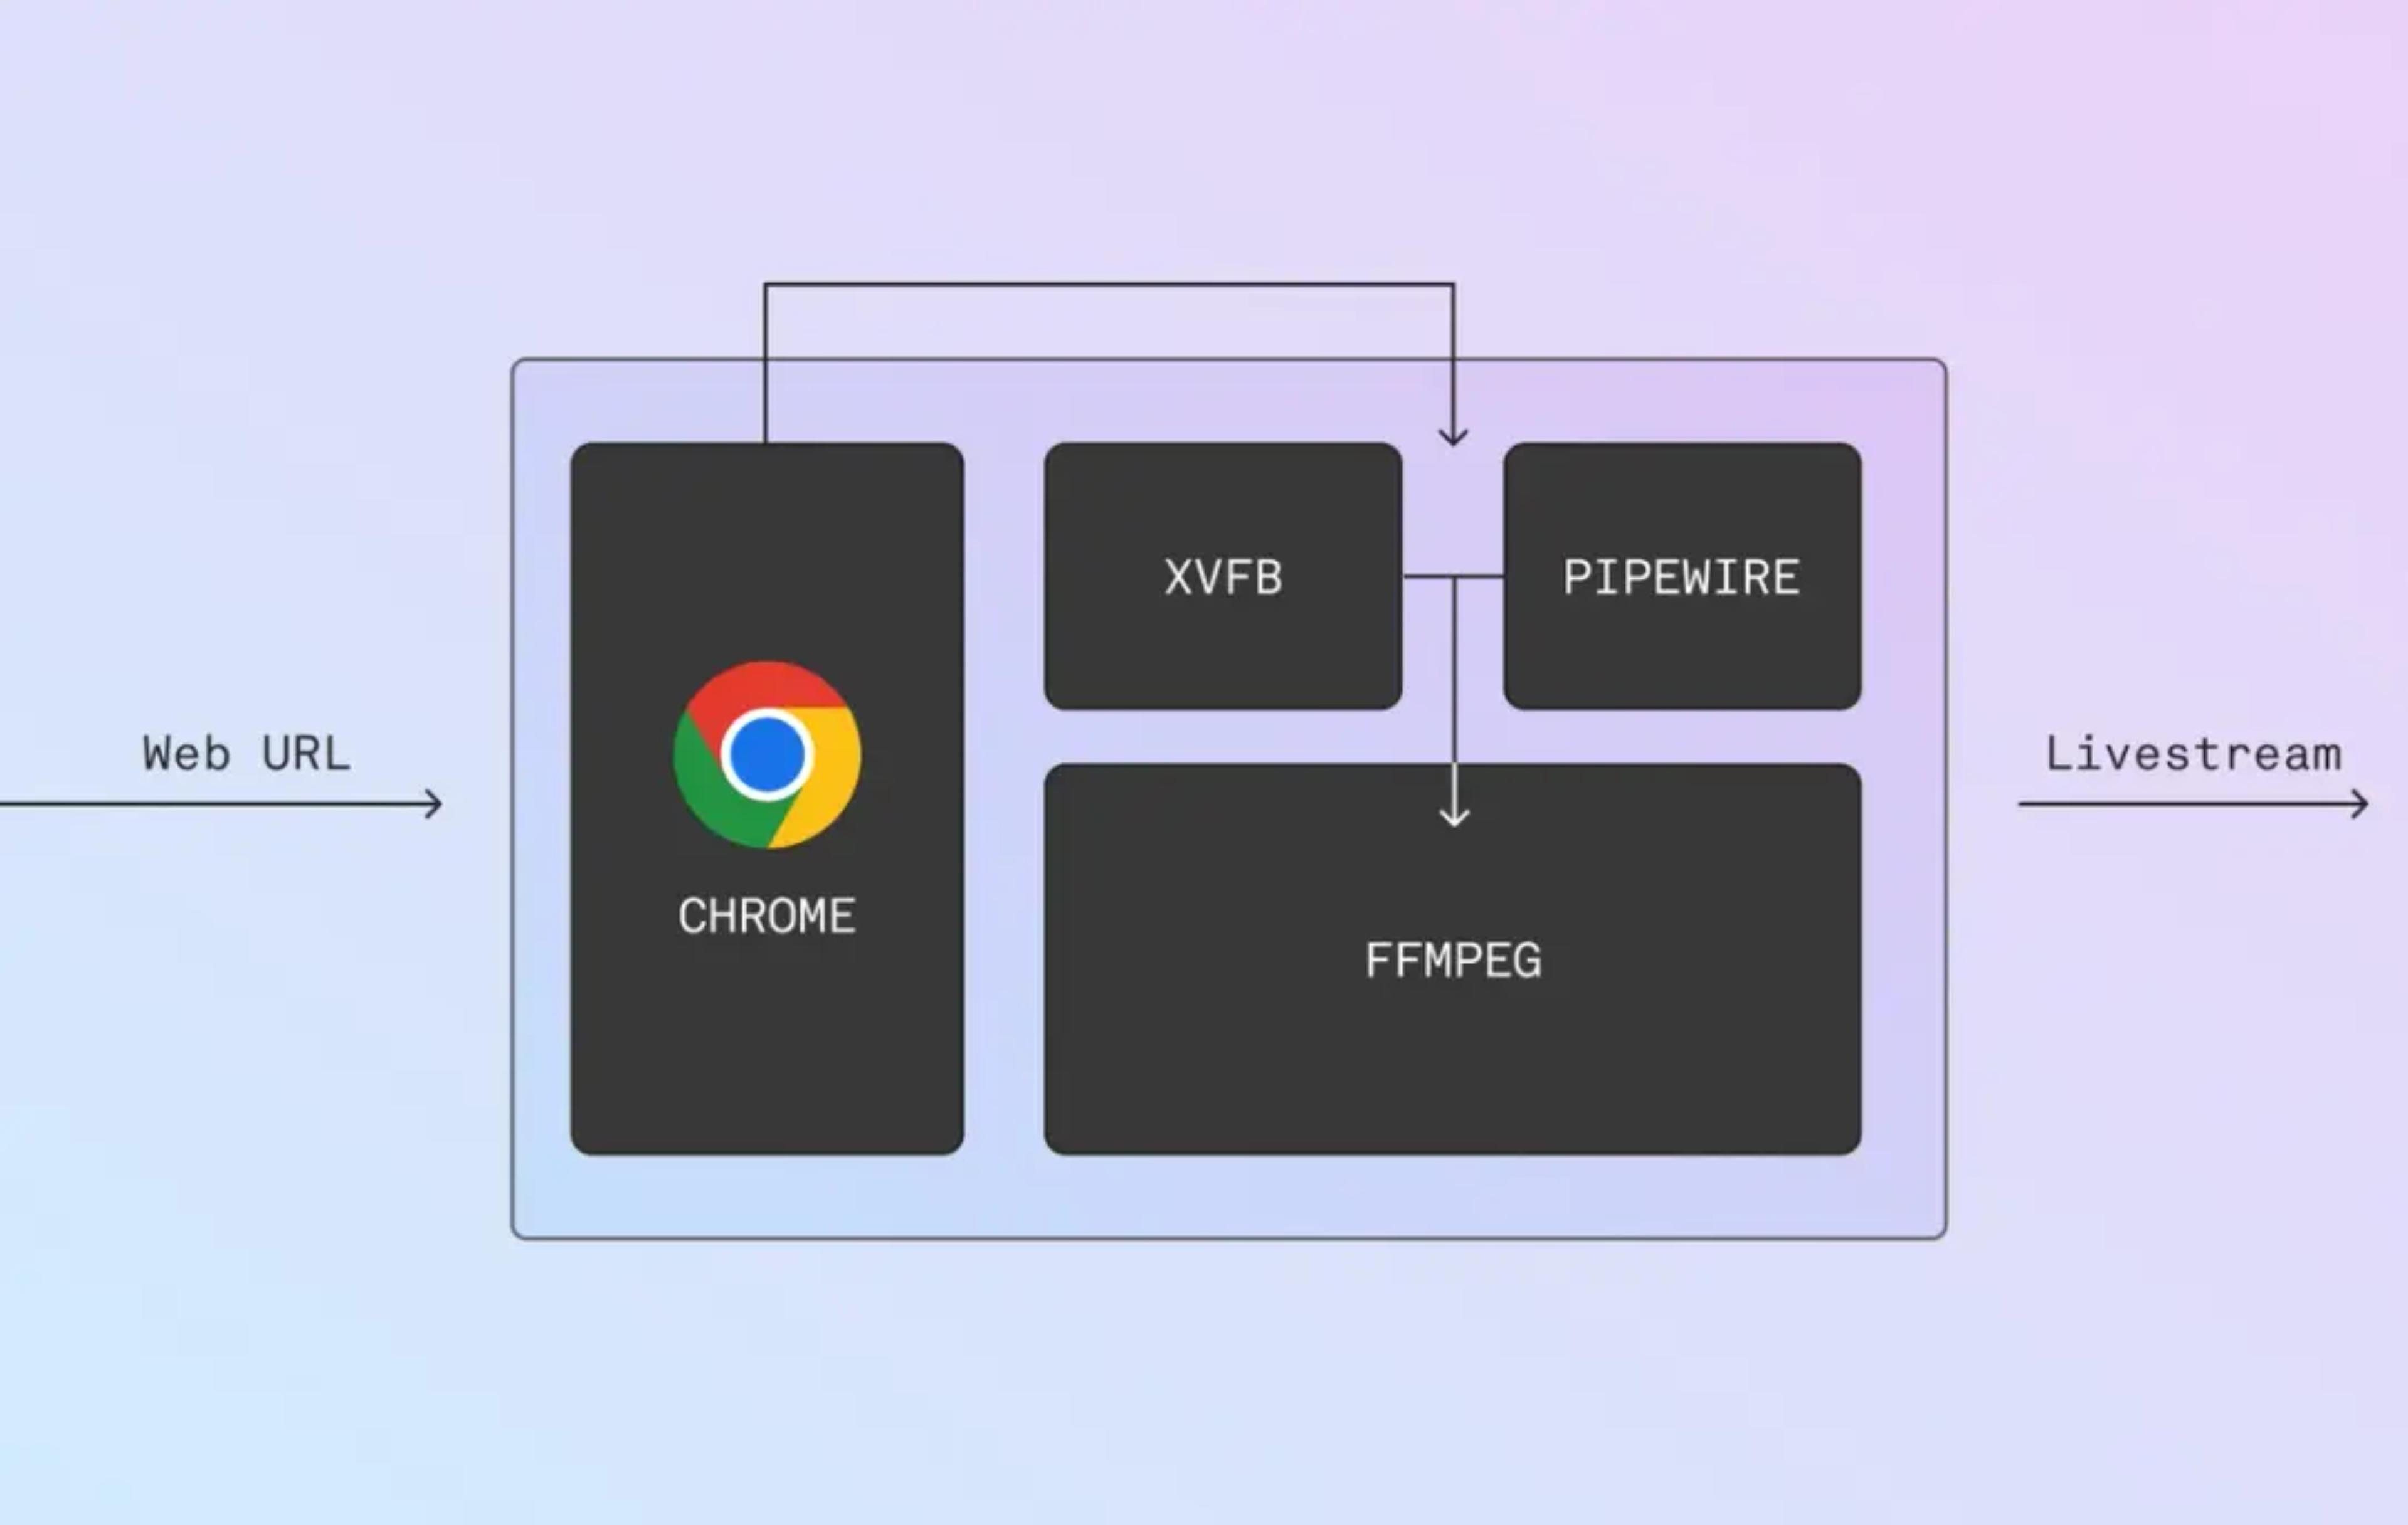 Web inputs diagram showing web inputs to headless Chrome running XVFB + PULS + FFMPEG with a live stream output